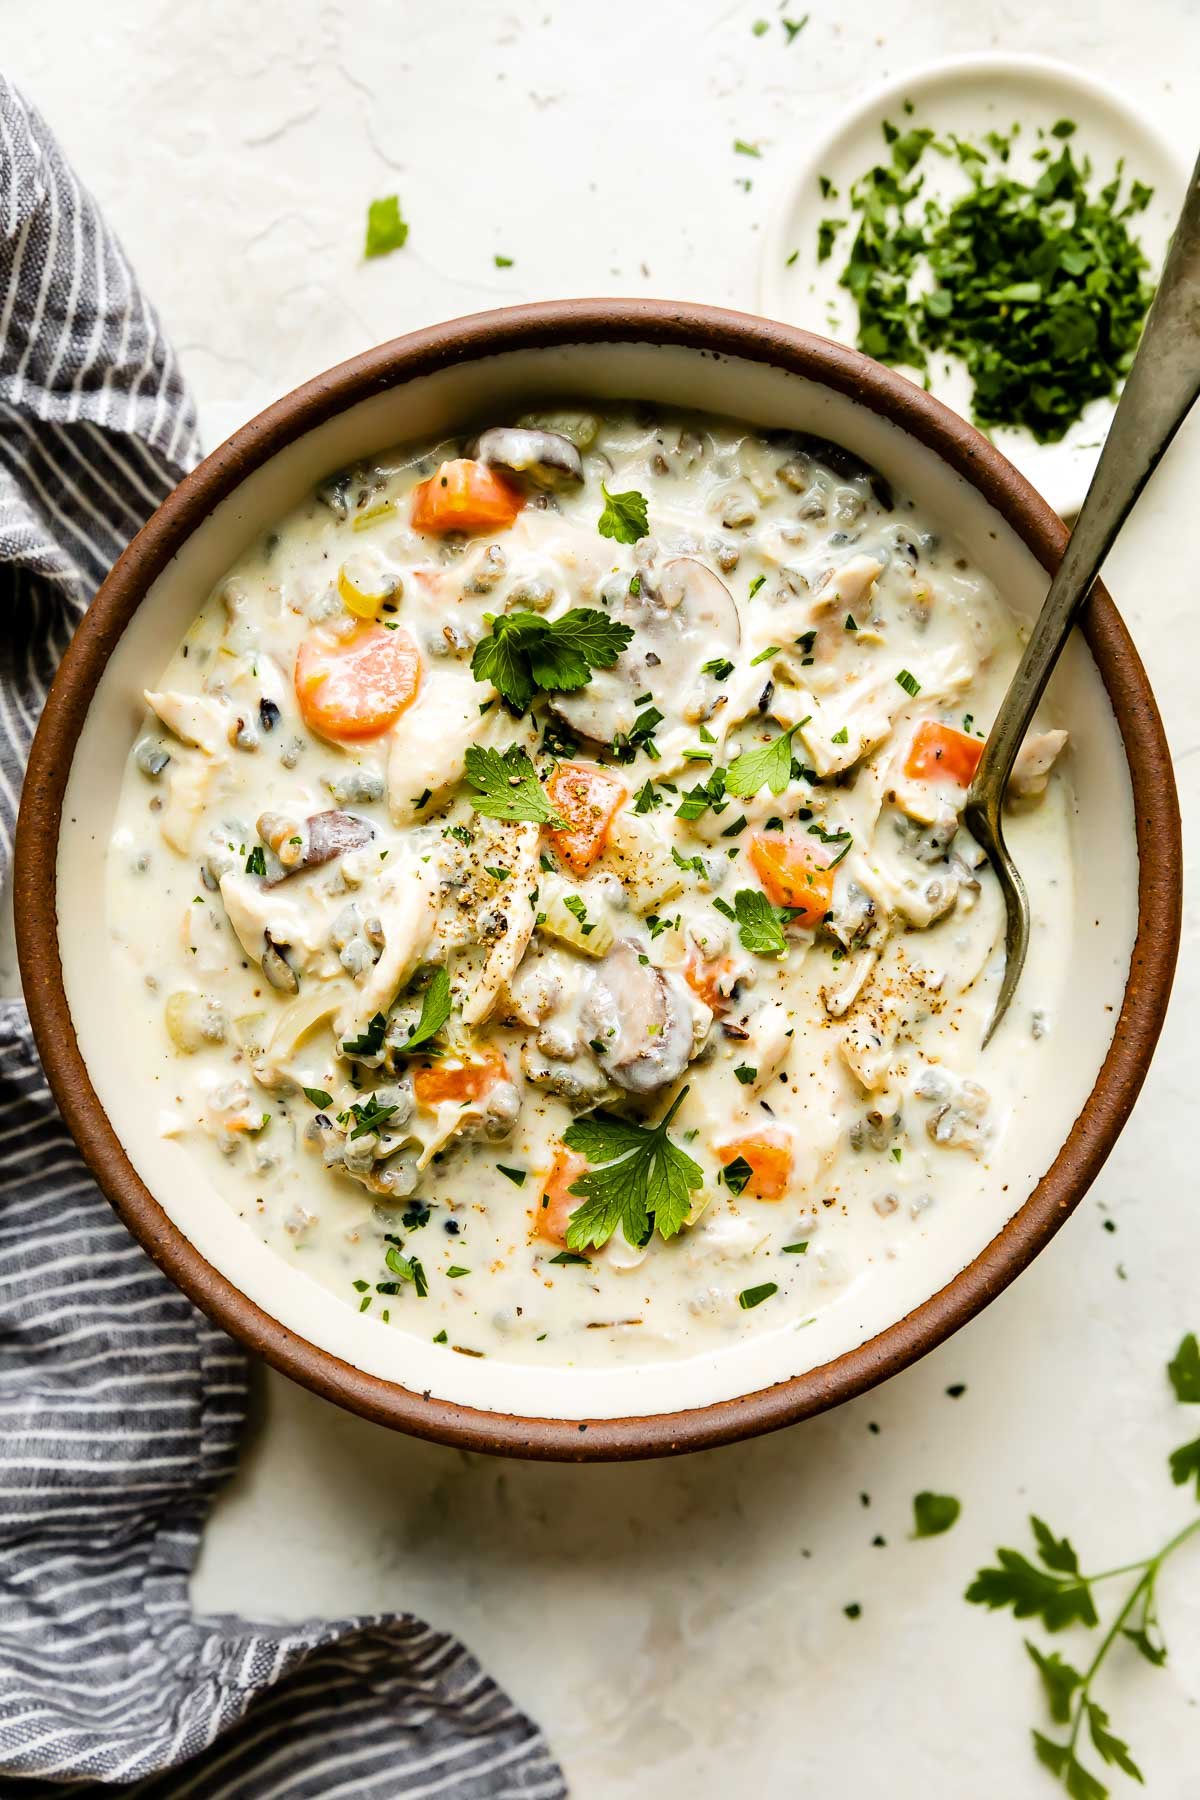 https://playswellwithbutter.com/wp-content/uploads/2022/11/Easy-Chicken-Wild-Rice-Soup-13.jpg